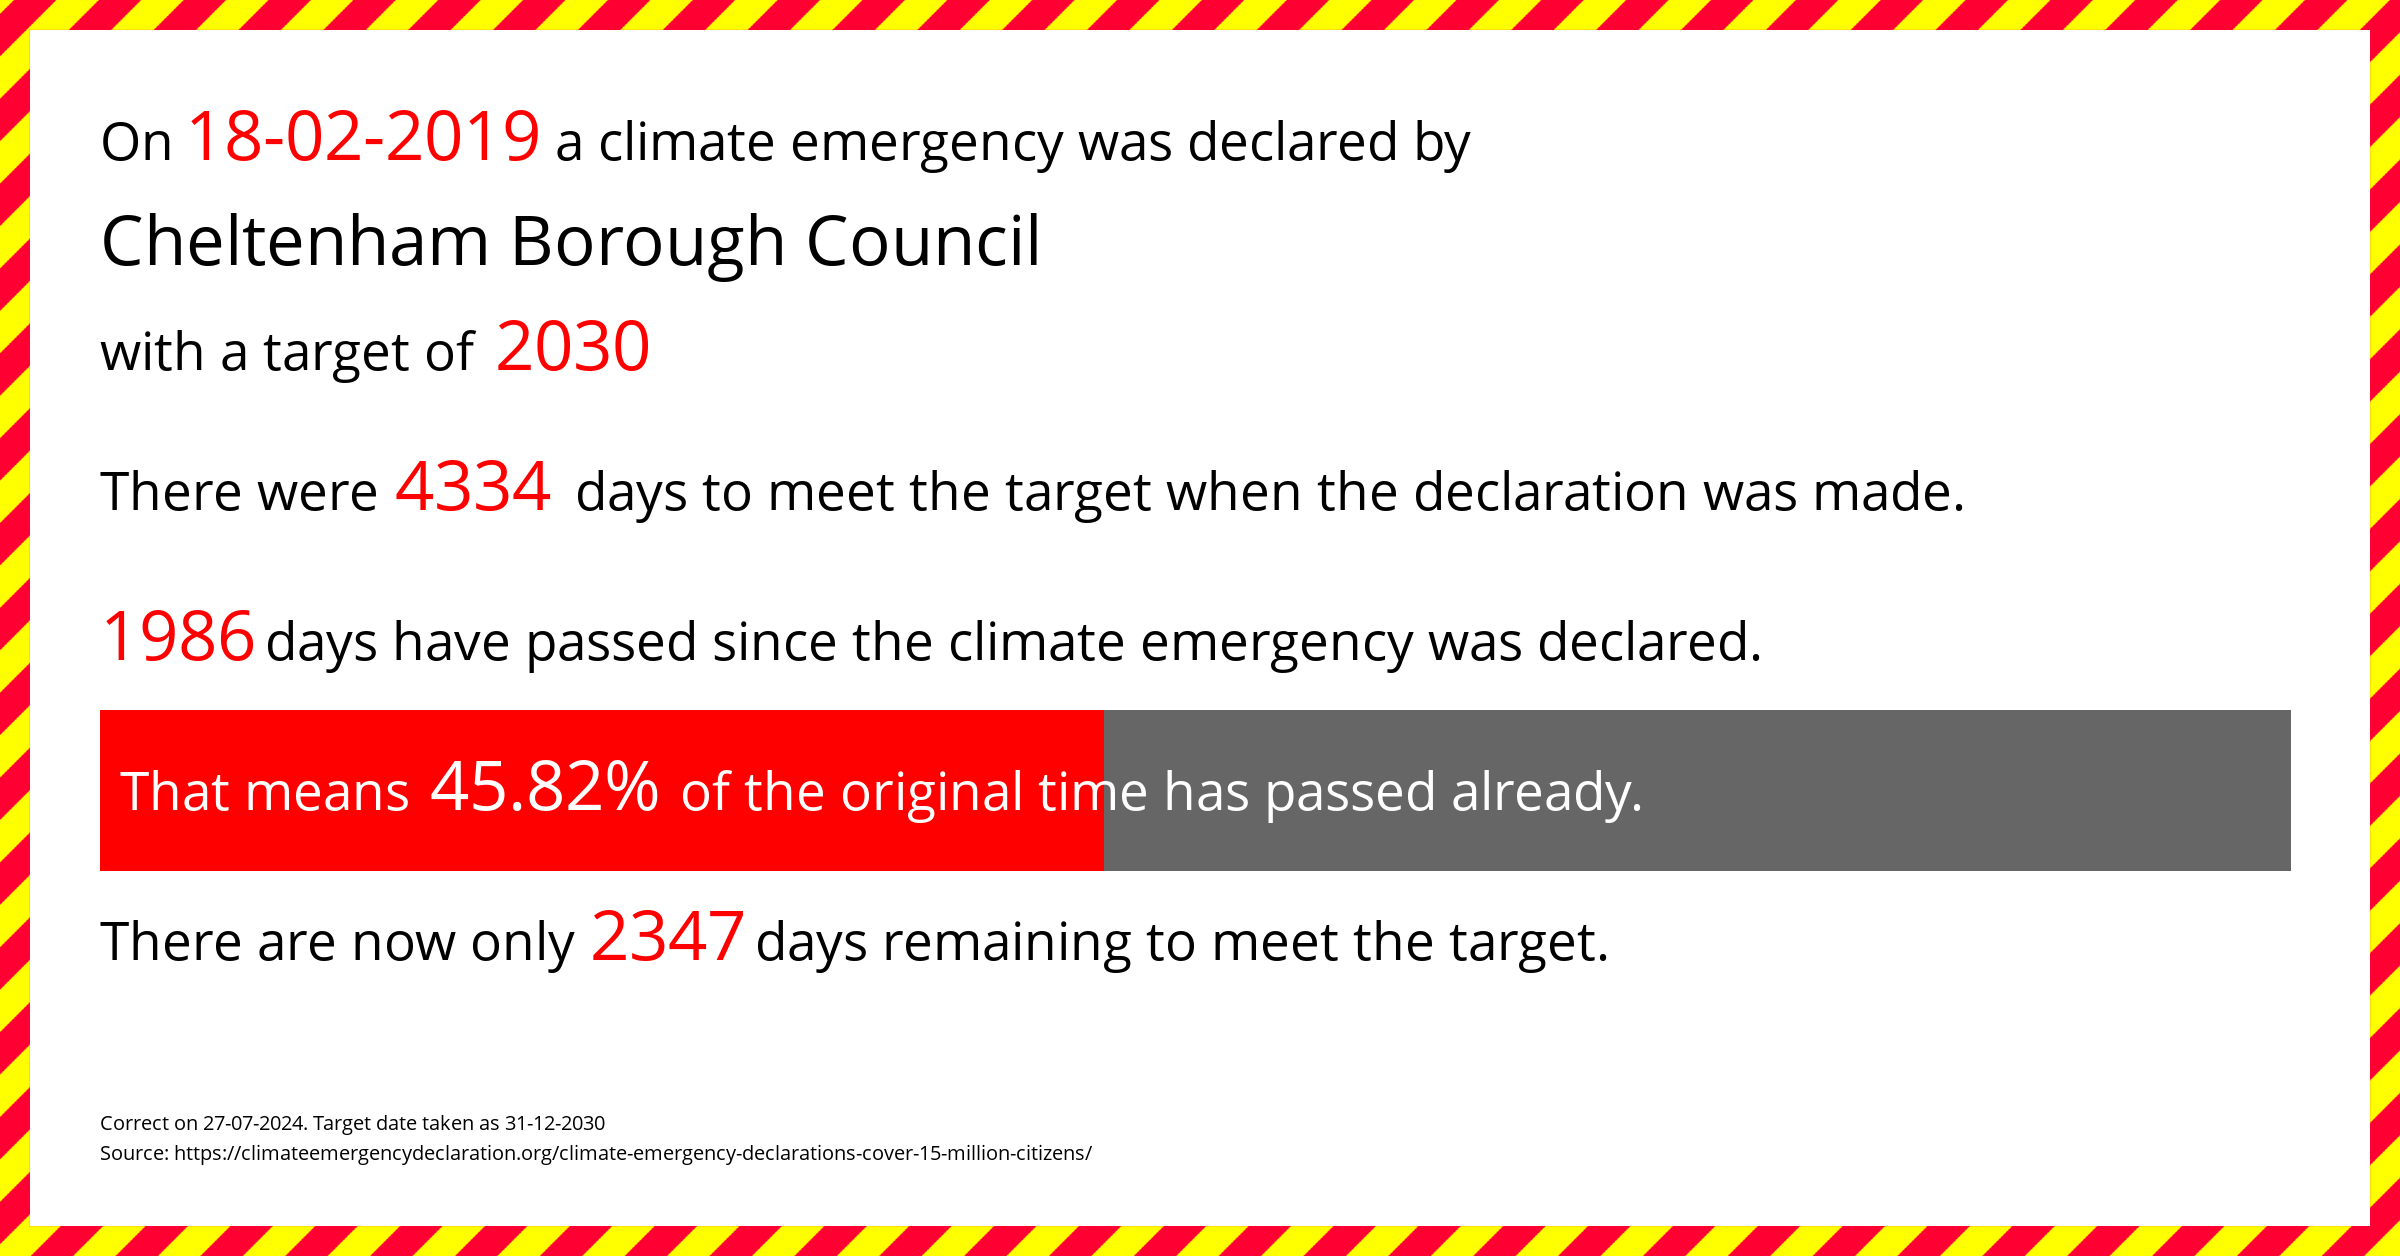 Cheltenham Borough Council declared a Climate emergency on Monday 18th February 2019, with a target of 2030.